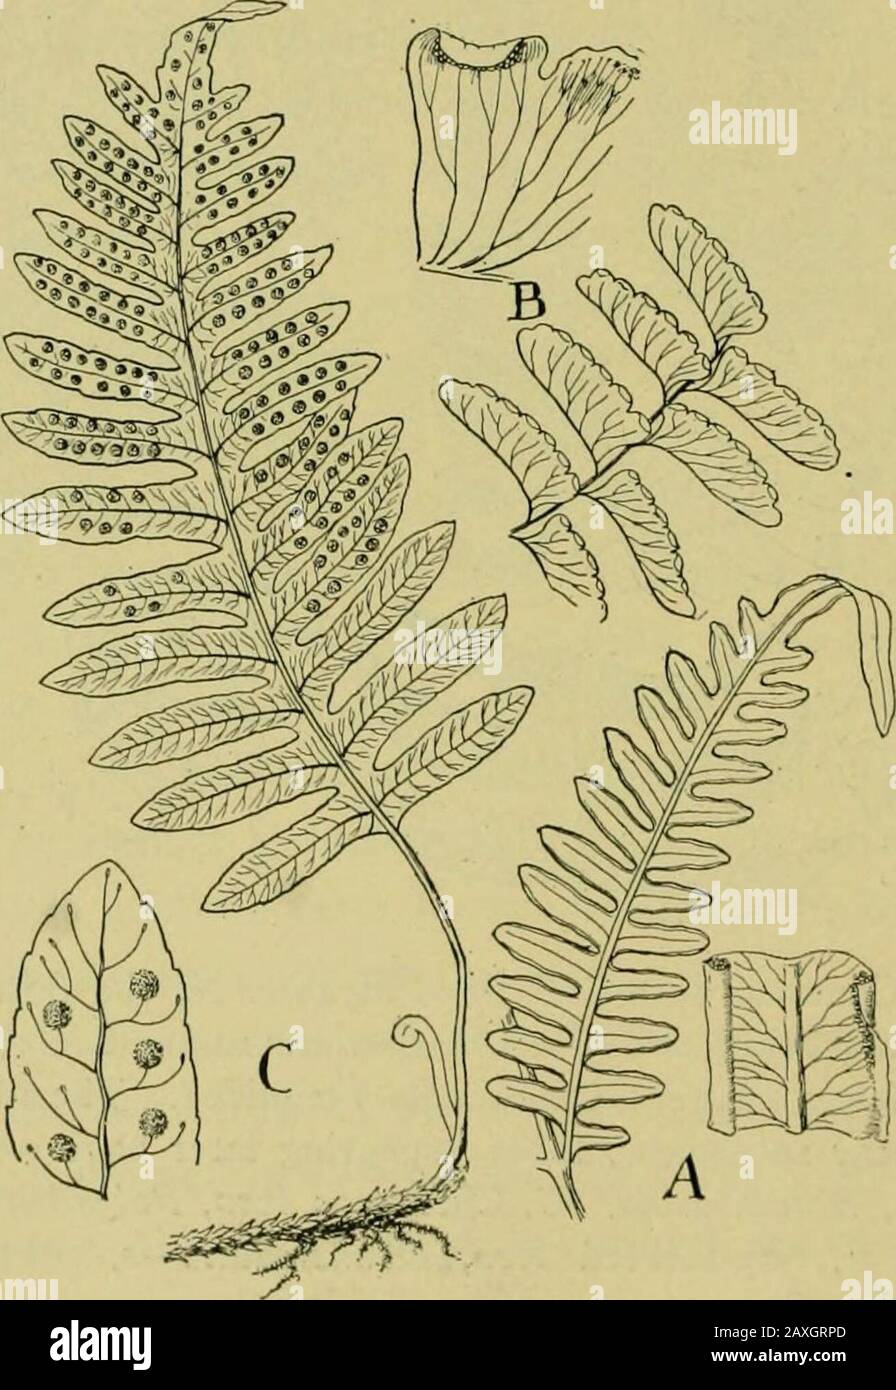 Nature and development of plants . a—s, sorus enlarged. F,Woodsia.—After Sprague. fern, Asplenium, is characterized by elongated sori arrangedobliquely to the midrib upon the upper side of the veinlets.The indusium is attached on one side of the sorus along its entirelength (Fig. 222, B). The chain fern, Woodwardia, differs 298 FORMS OF FILICALES from Asplenium in having the sori arranged in chain-like rowsparallel to its midrib (Fig. 225, B). In several genera of fernsthe indusium is partly or entirely inferior. Thus in the bladderfern, Filix, the partly inferior indusium covers the circular Stock Photo